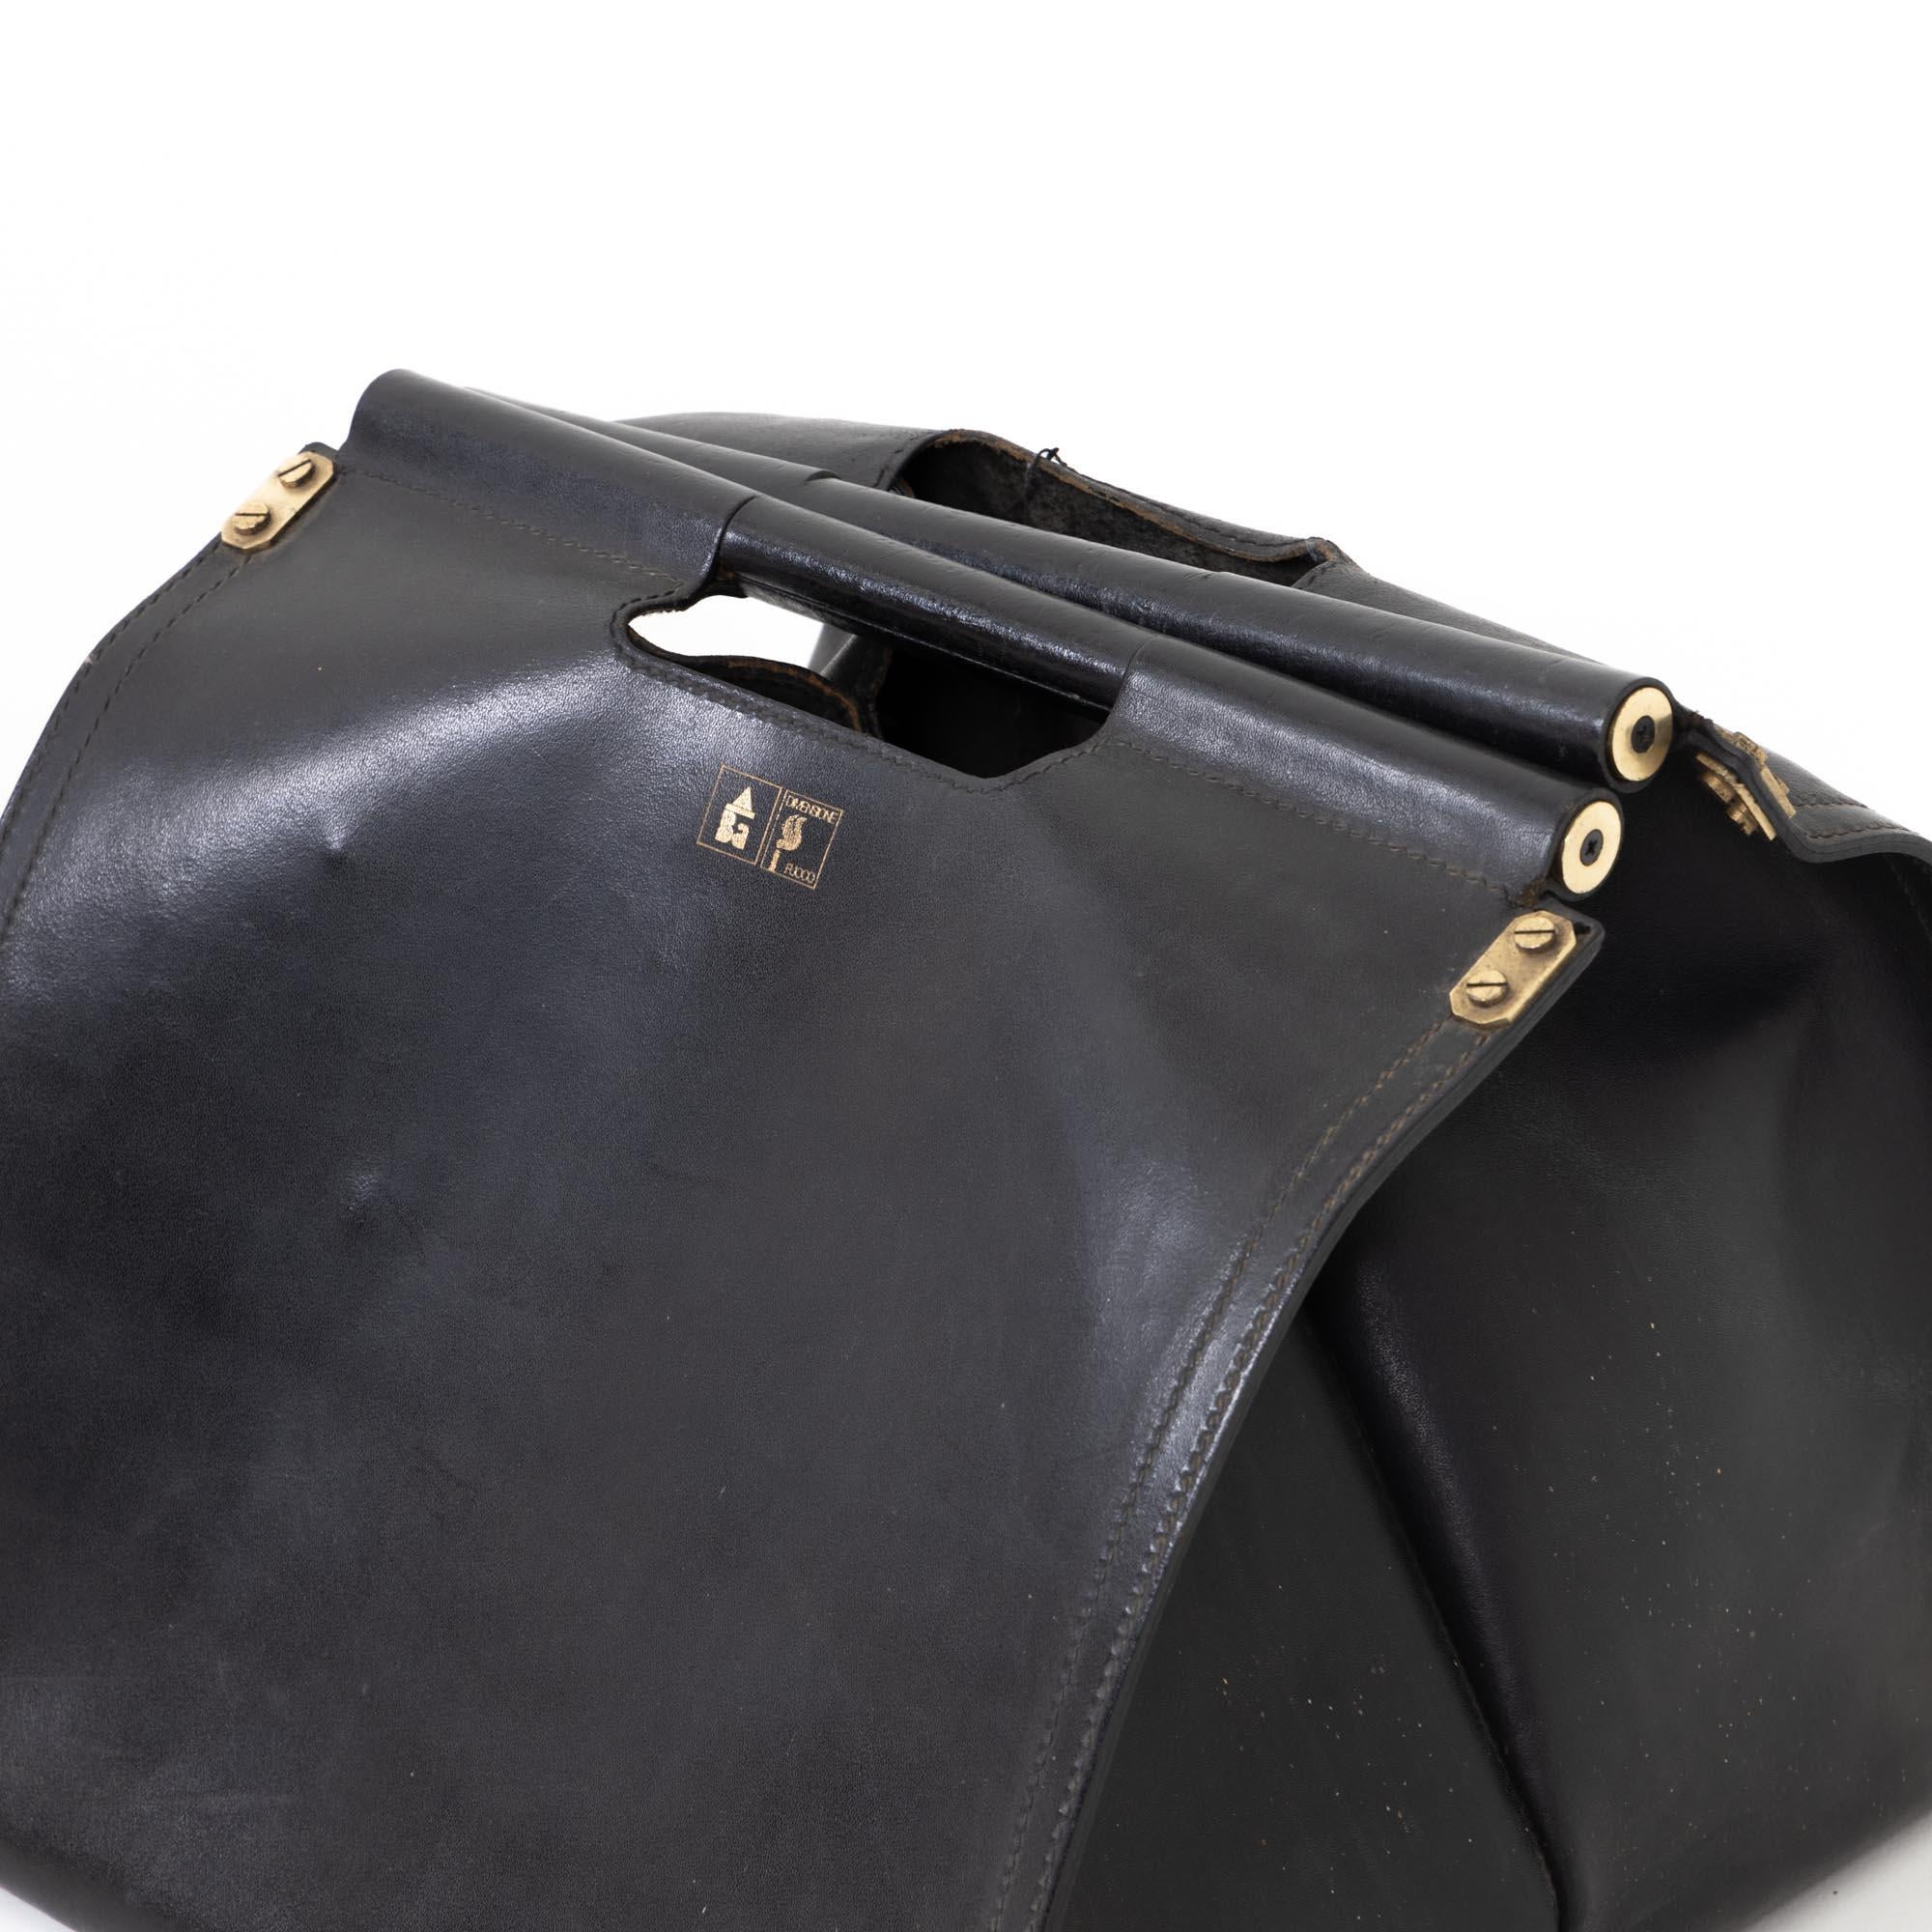 Large bag made of black leather with brass fittings. This leather bag was designed for stylish storage for logs by Afra and Tobia Scarpa for the Italian fireplace manufacturer Dimensione Fuoco Bellona in the 1980s. Below the handle is the company's